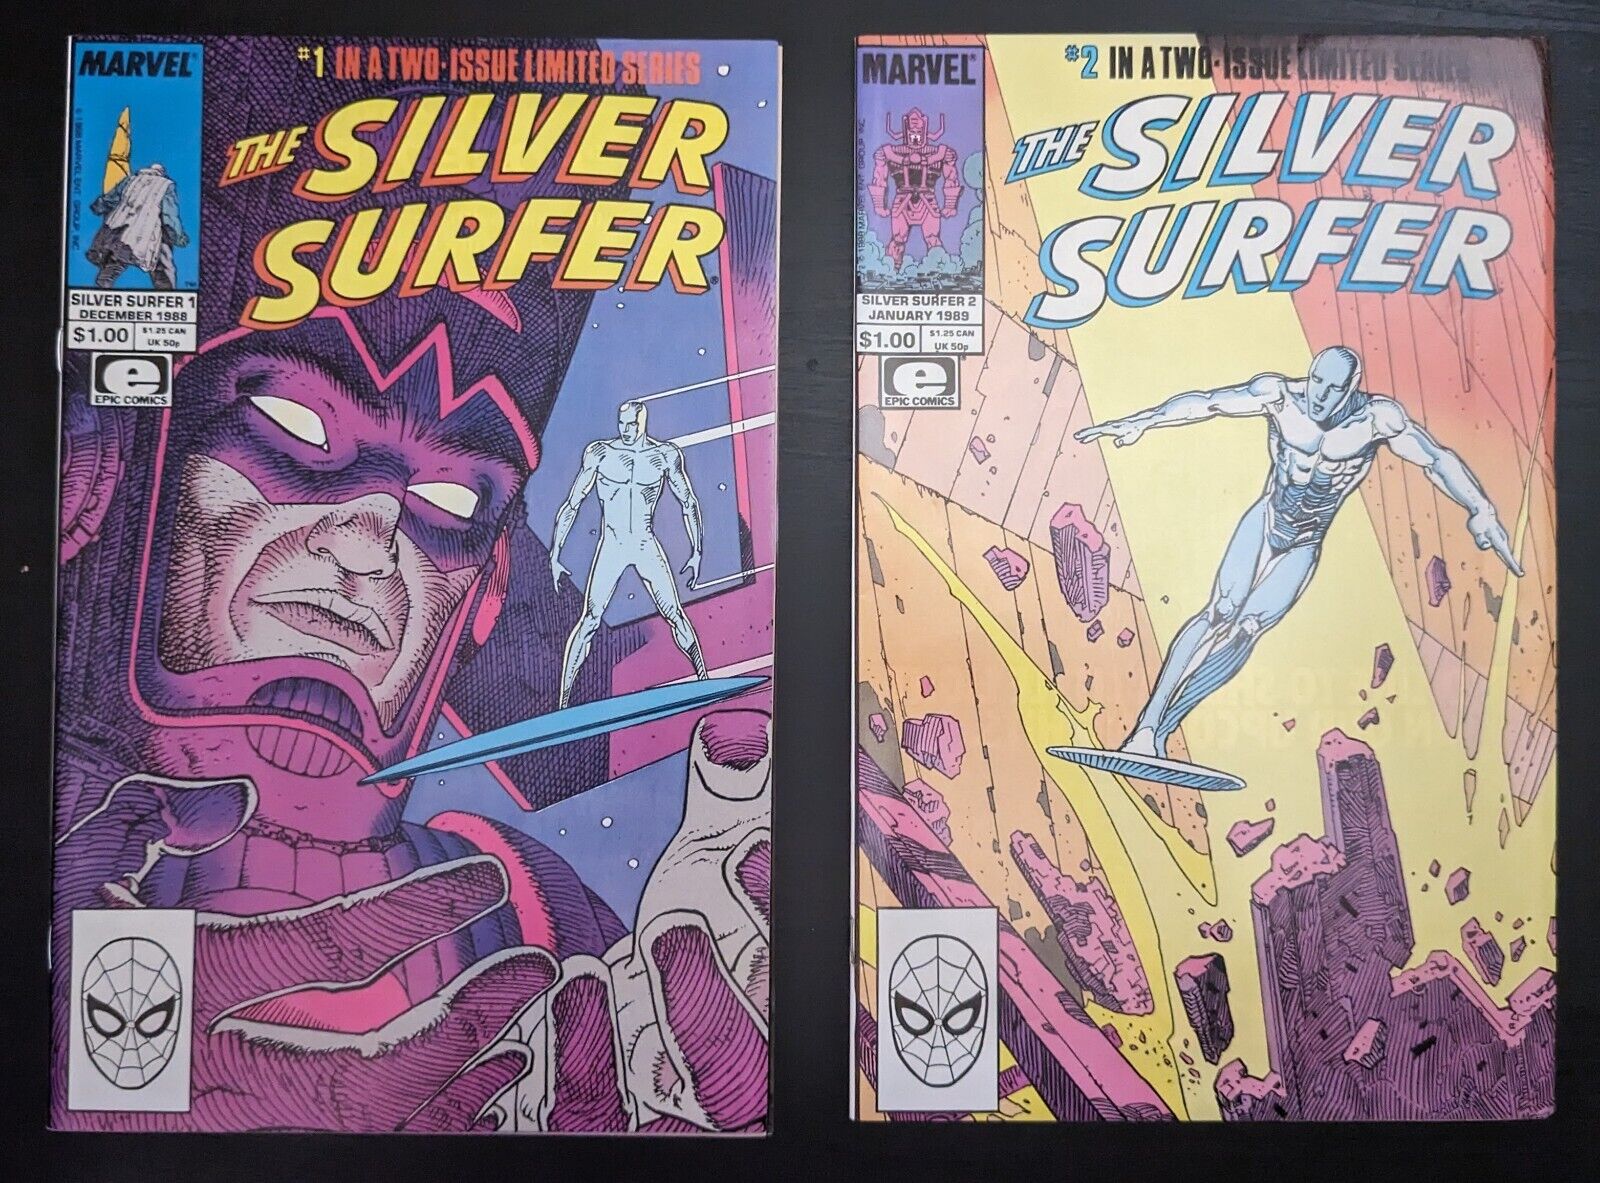 The Silver Surfer #1 & #2 Galactus Marvel Two Issue Limited Series Comics 1988